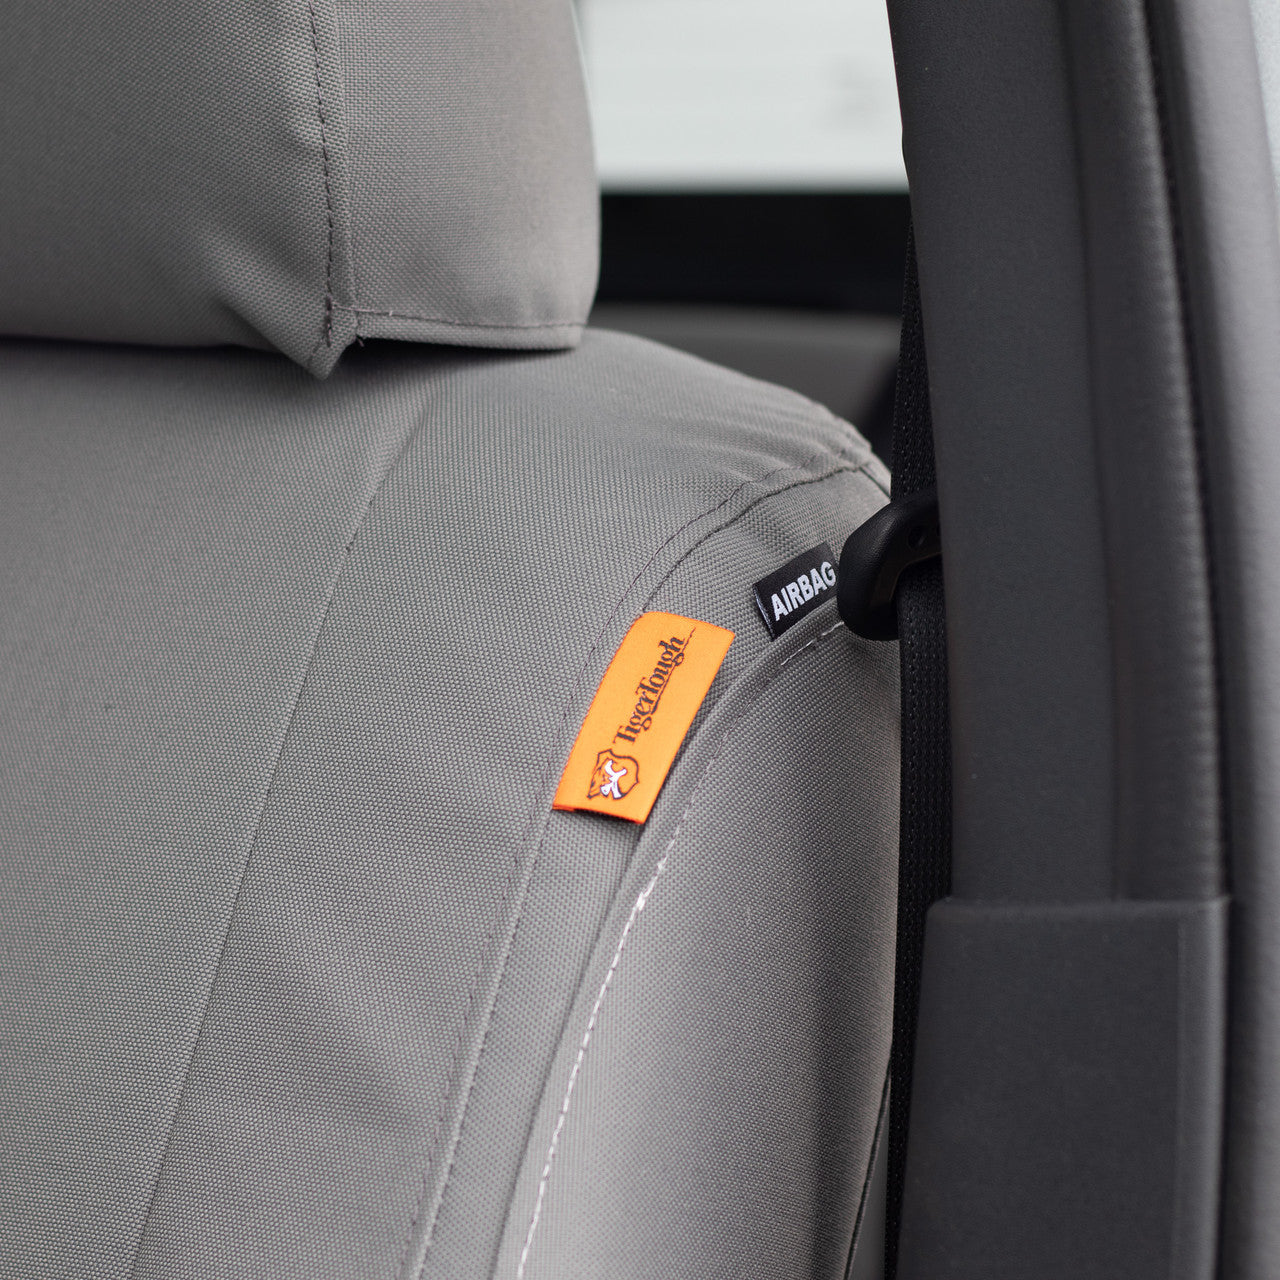 TigerTough Nissan Titan Heavy Duty Front Seat Covers - Headrest Detail and Airbag compatible patch, because safety first.